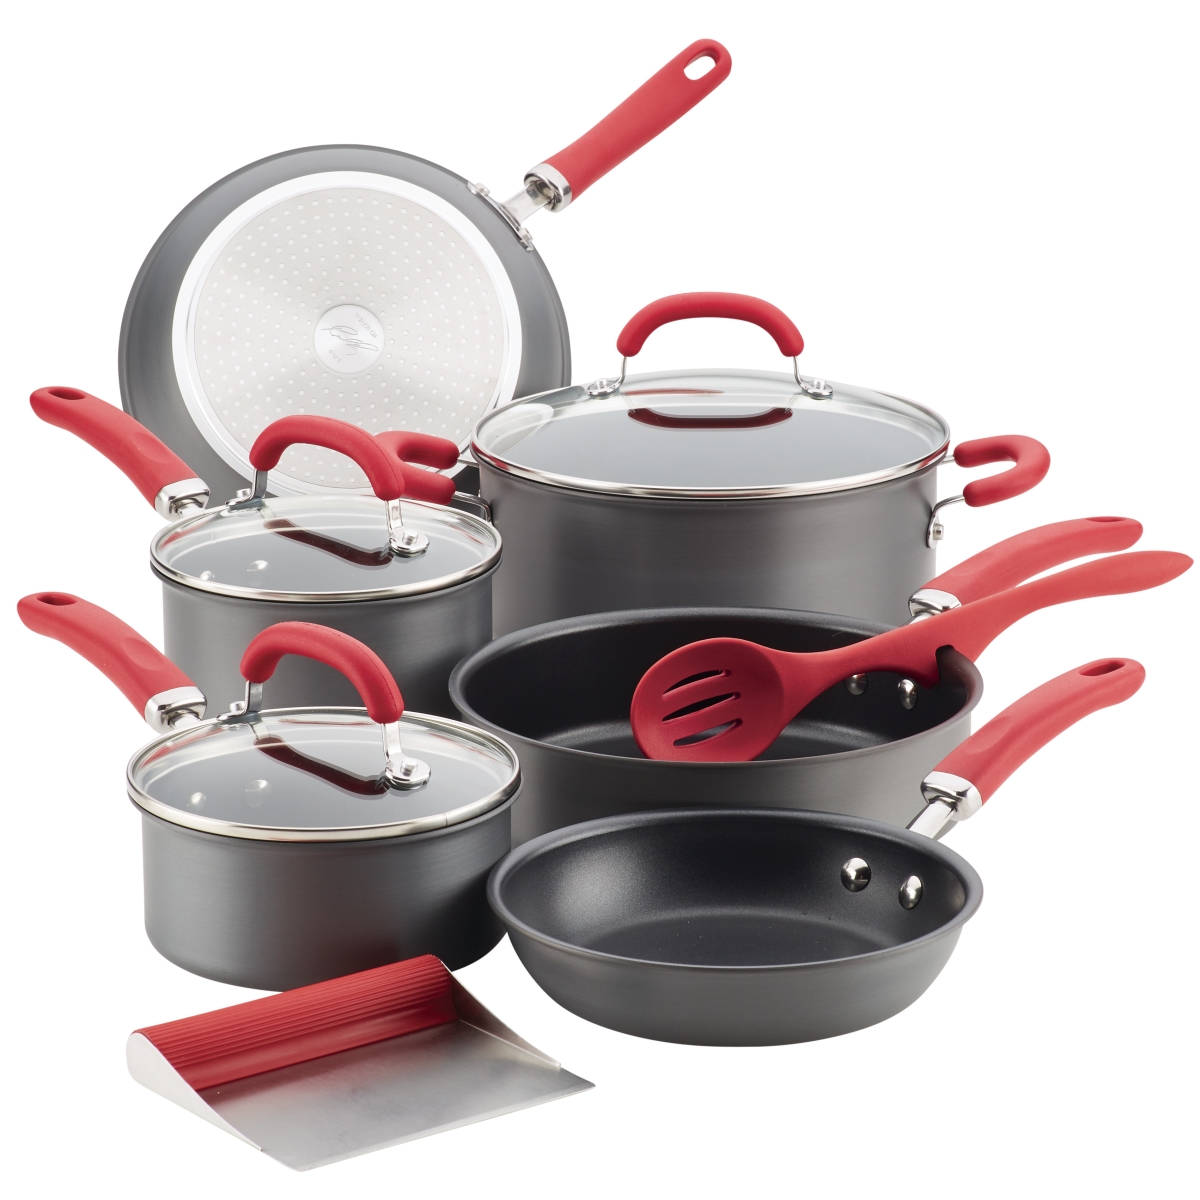 Rachael Ray 81157 Create Delicious Hard-Anodized Aluminum Nonstick Cookware Set - Red Handles, 11 Piece